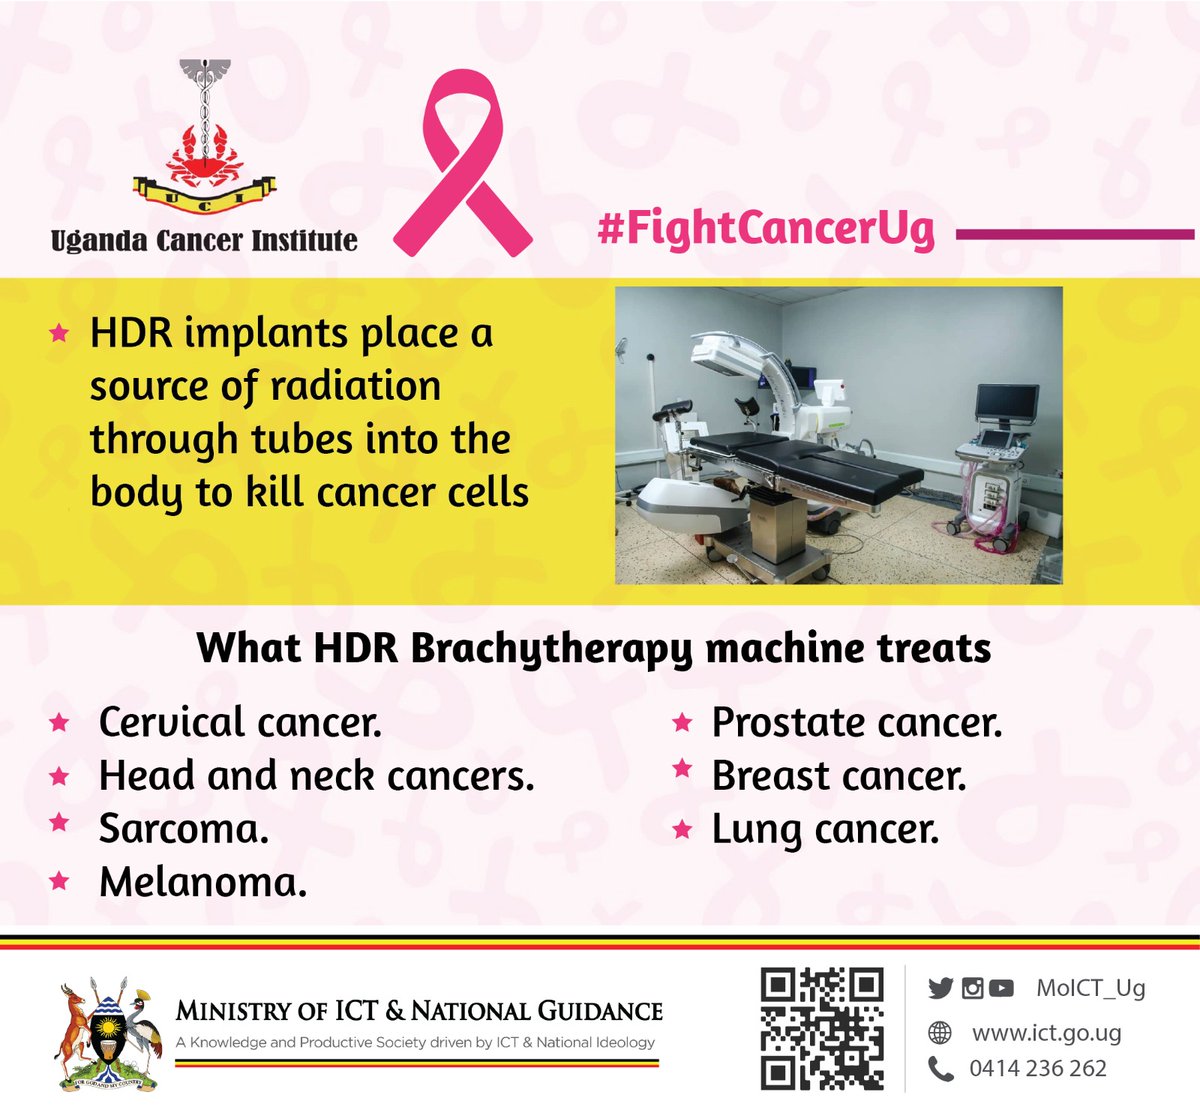 Cancer is a genetic disorder. It happens when genes that manage cell activity mutate and create abnormal cells that divide and multiply, eventually disrupting how your body works.
#FightCancerUg
@UgandaCancerIns @DMU_Uganda @GovUganda